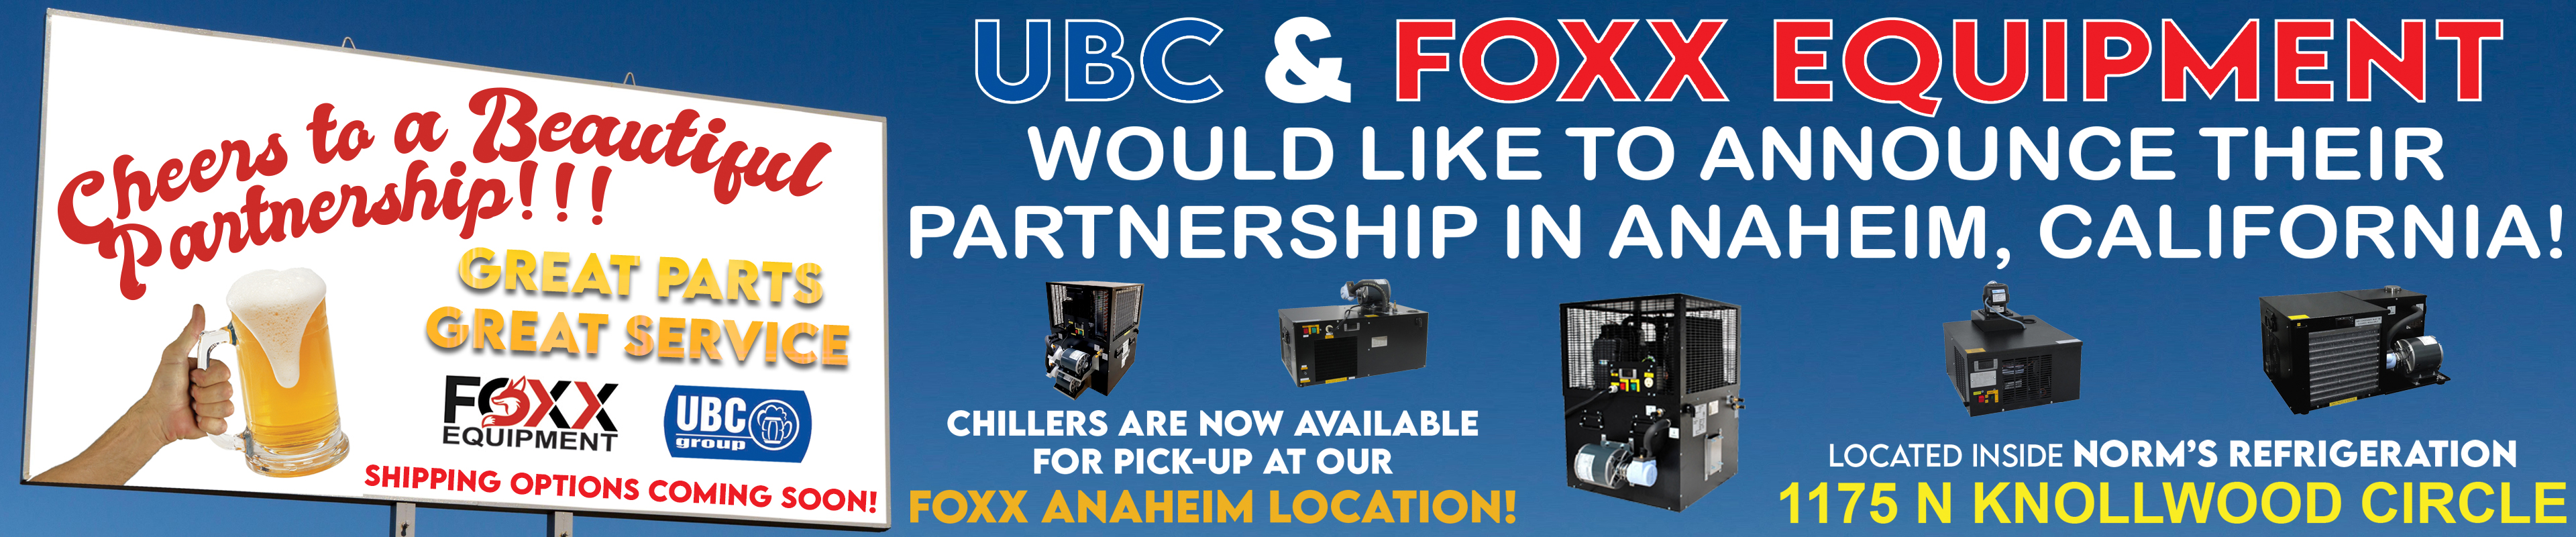 UBC and Foxx are partnering in Anaheim, CA